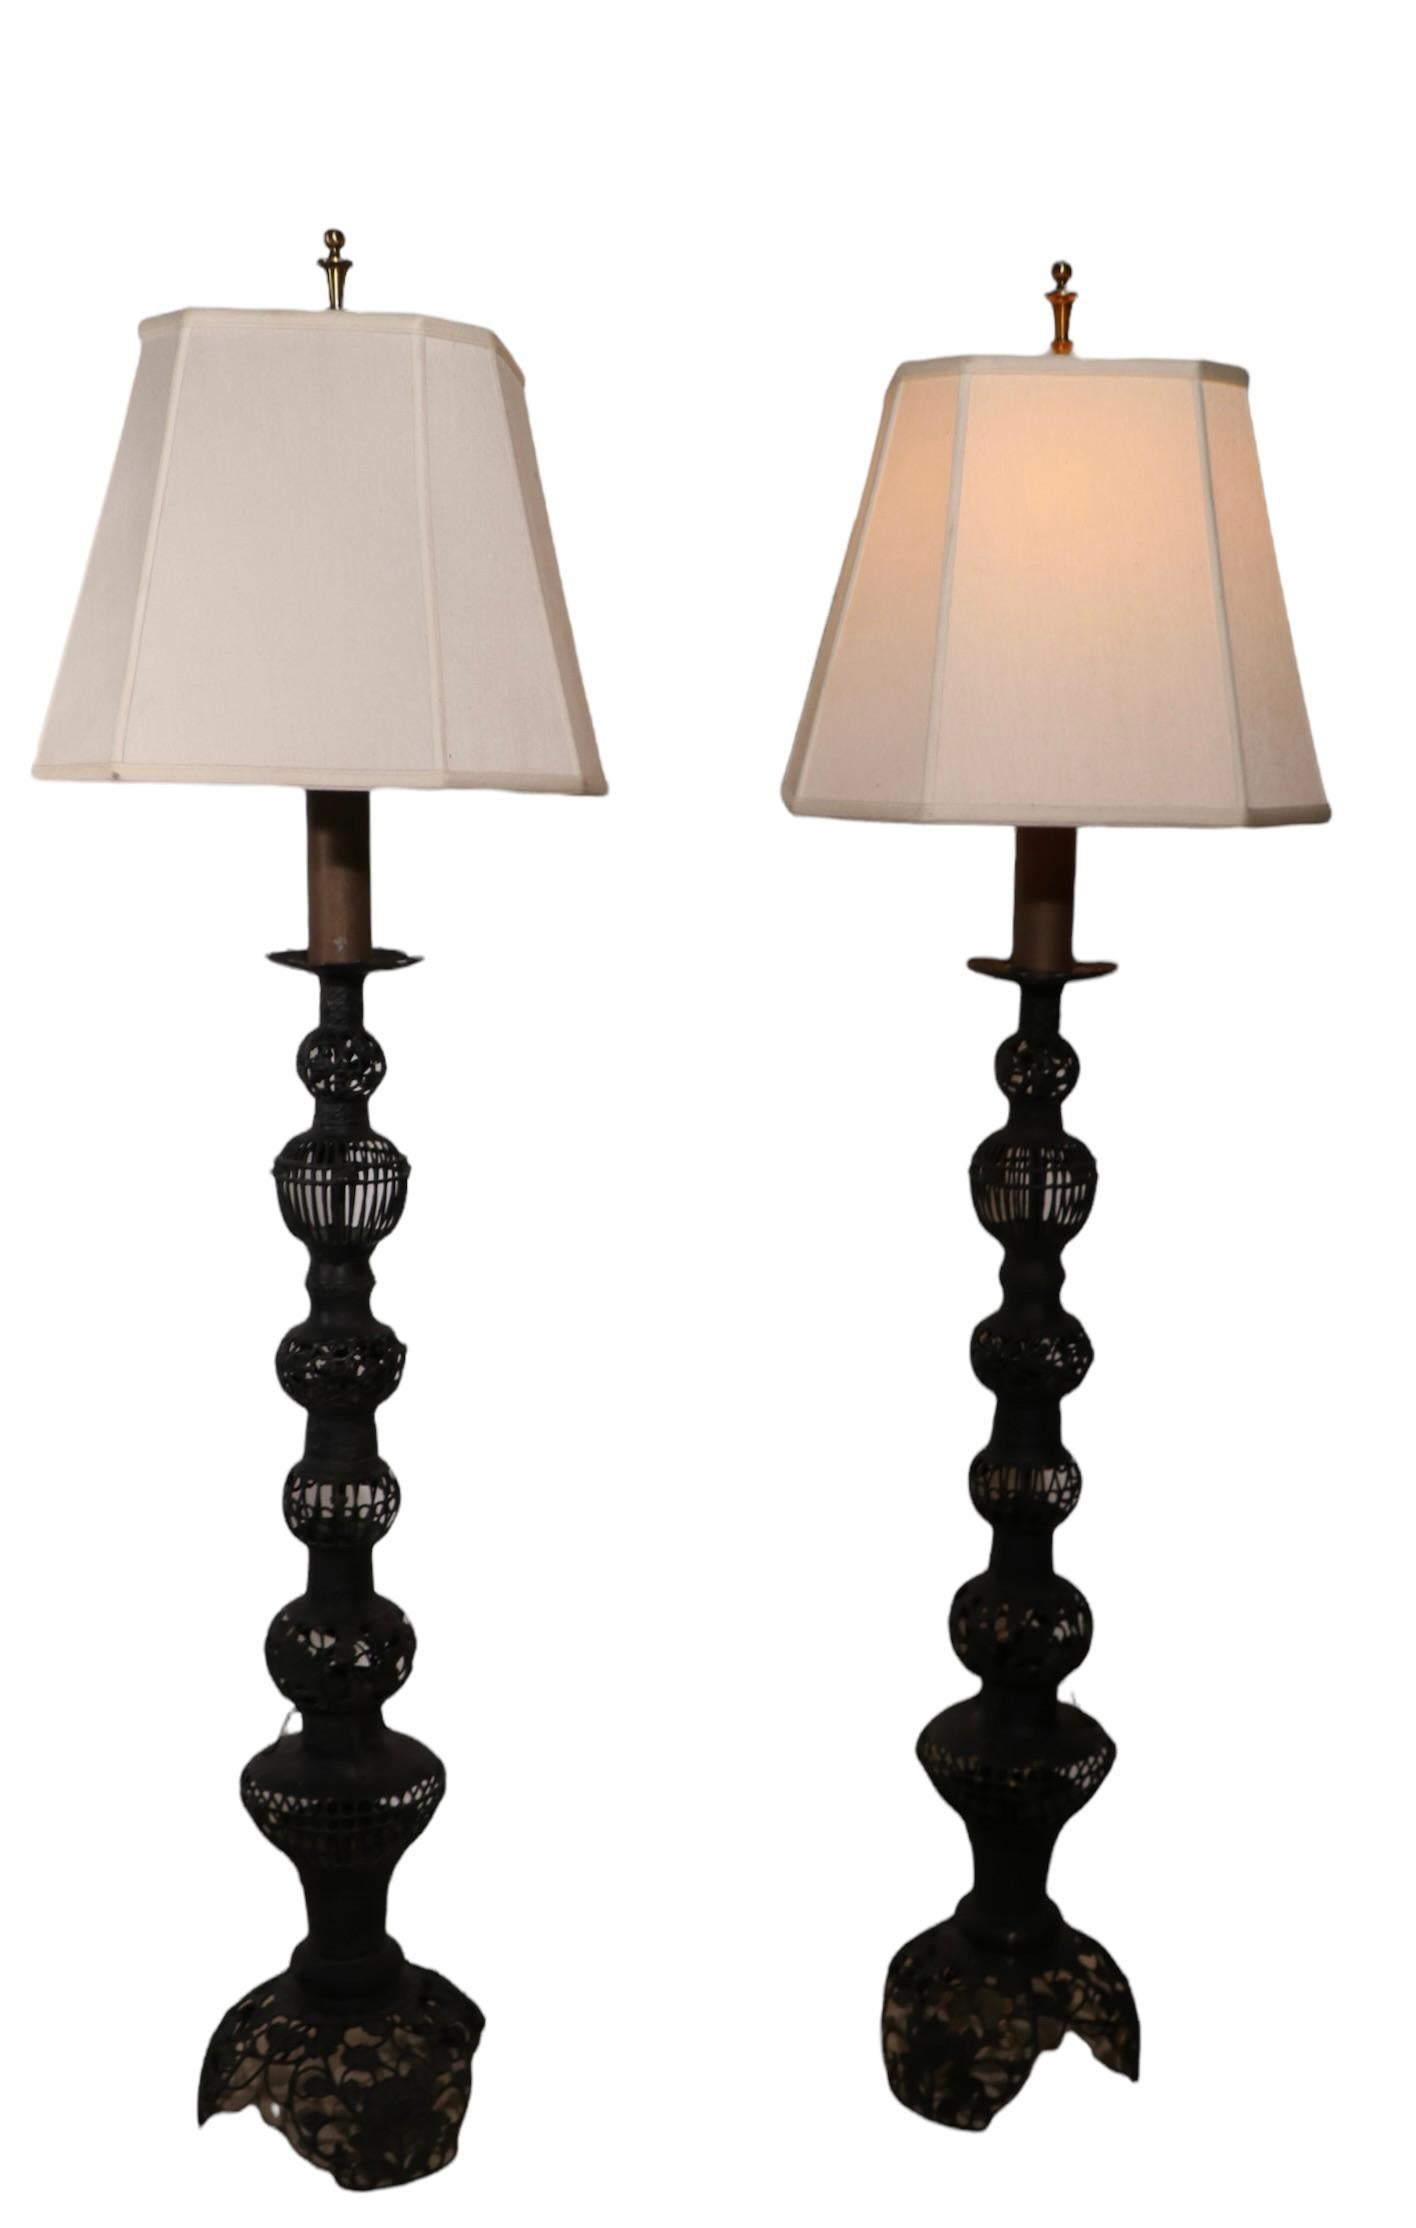 Pr. Decorative Vintage Pierced Metal Floor Lamps Made in India Ca. 1970's In Good Condition For Sale In New York, NY